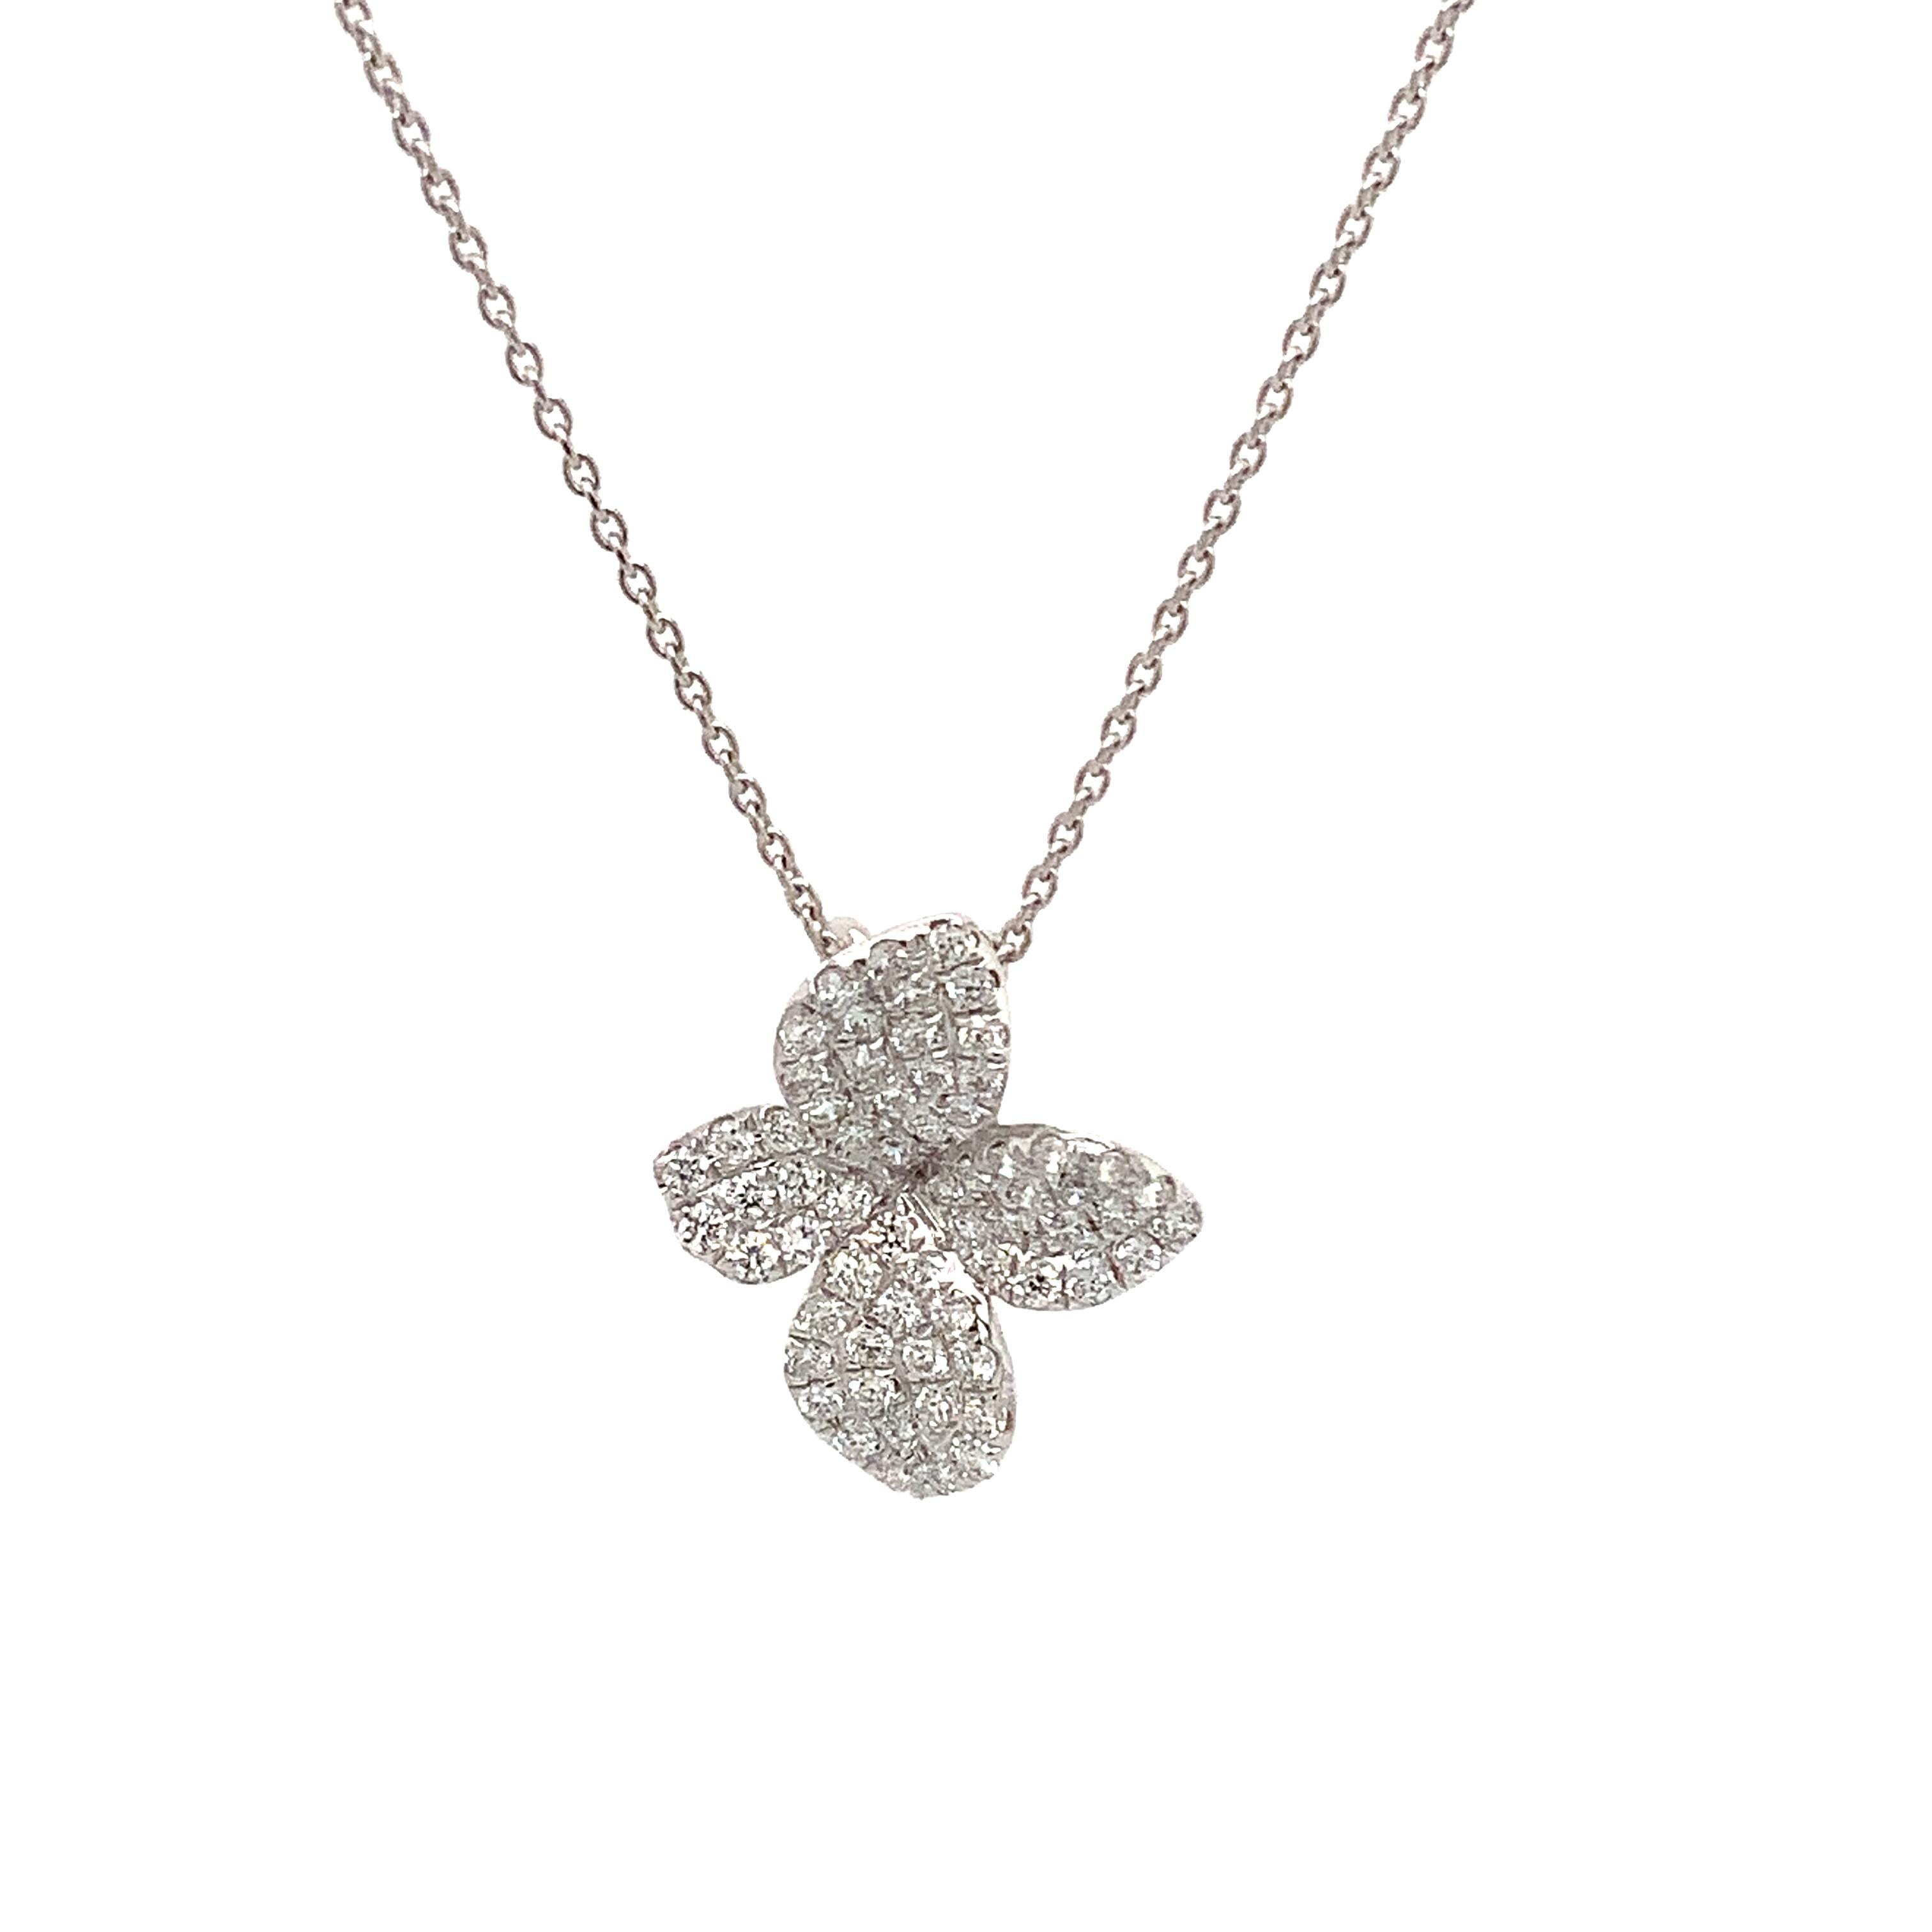 This Afarin Collection Pavé Petite Garden Diamond Pendant comes in 18 kt White Gold and contains 0.43 cts t.w. Brilliant Cut Rounds with F in Color and VS in Clarity, giving off an excellent Make and Polish. It measures 16.5 x 13.2 mm with a 1 mm